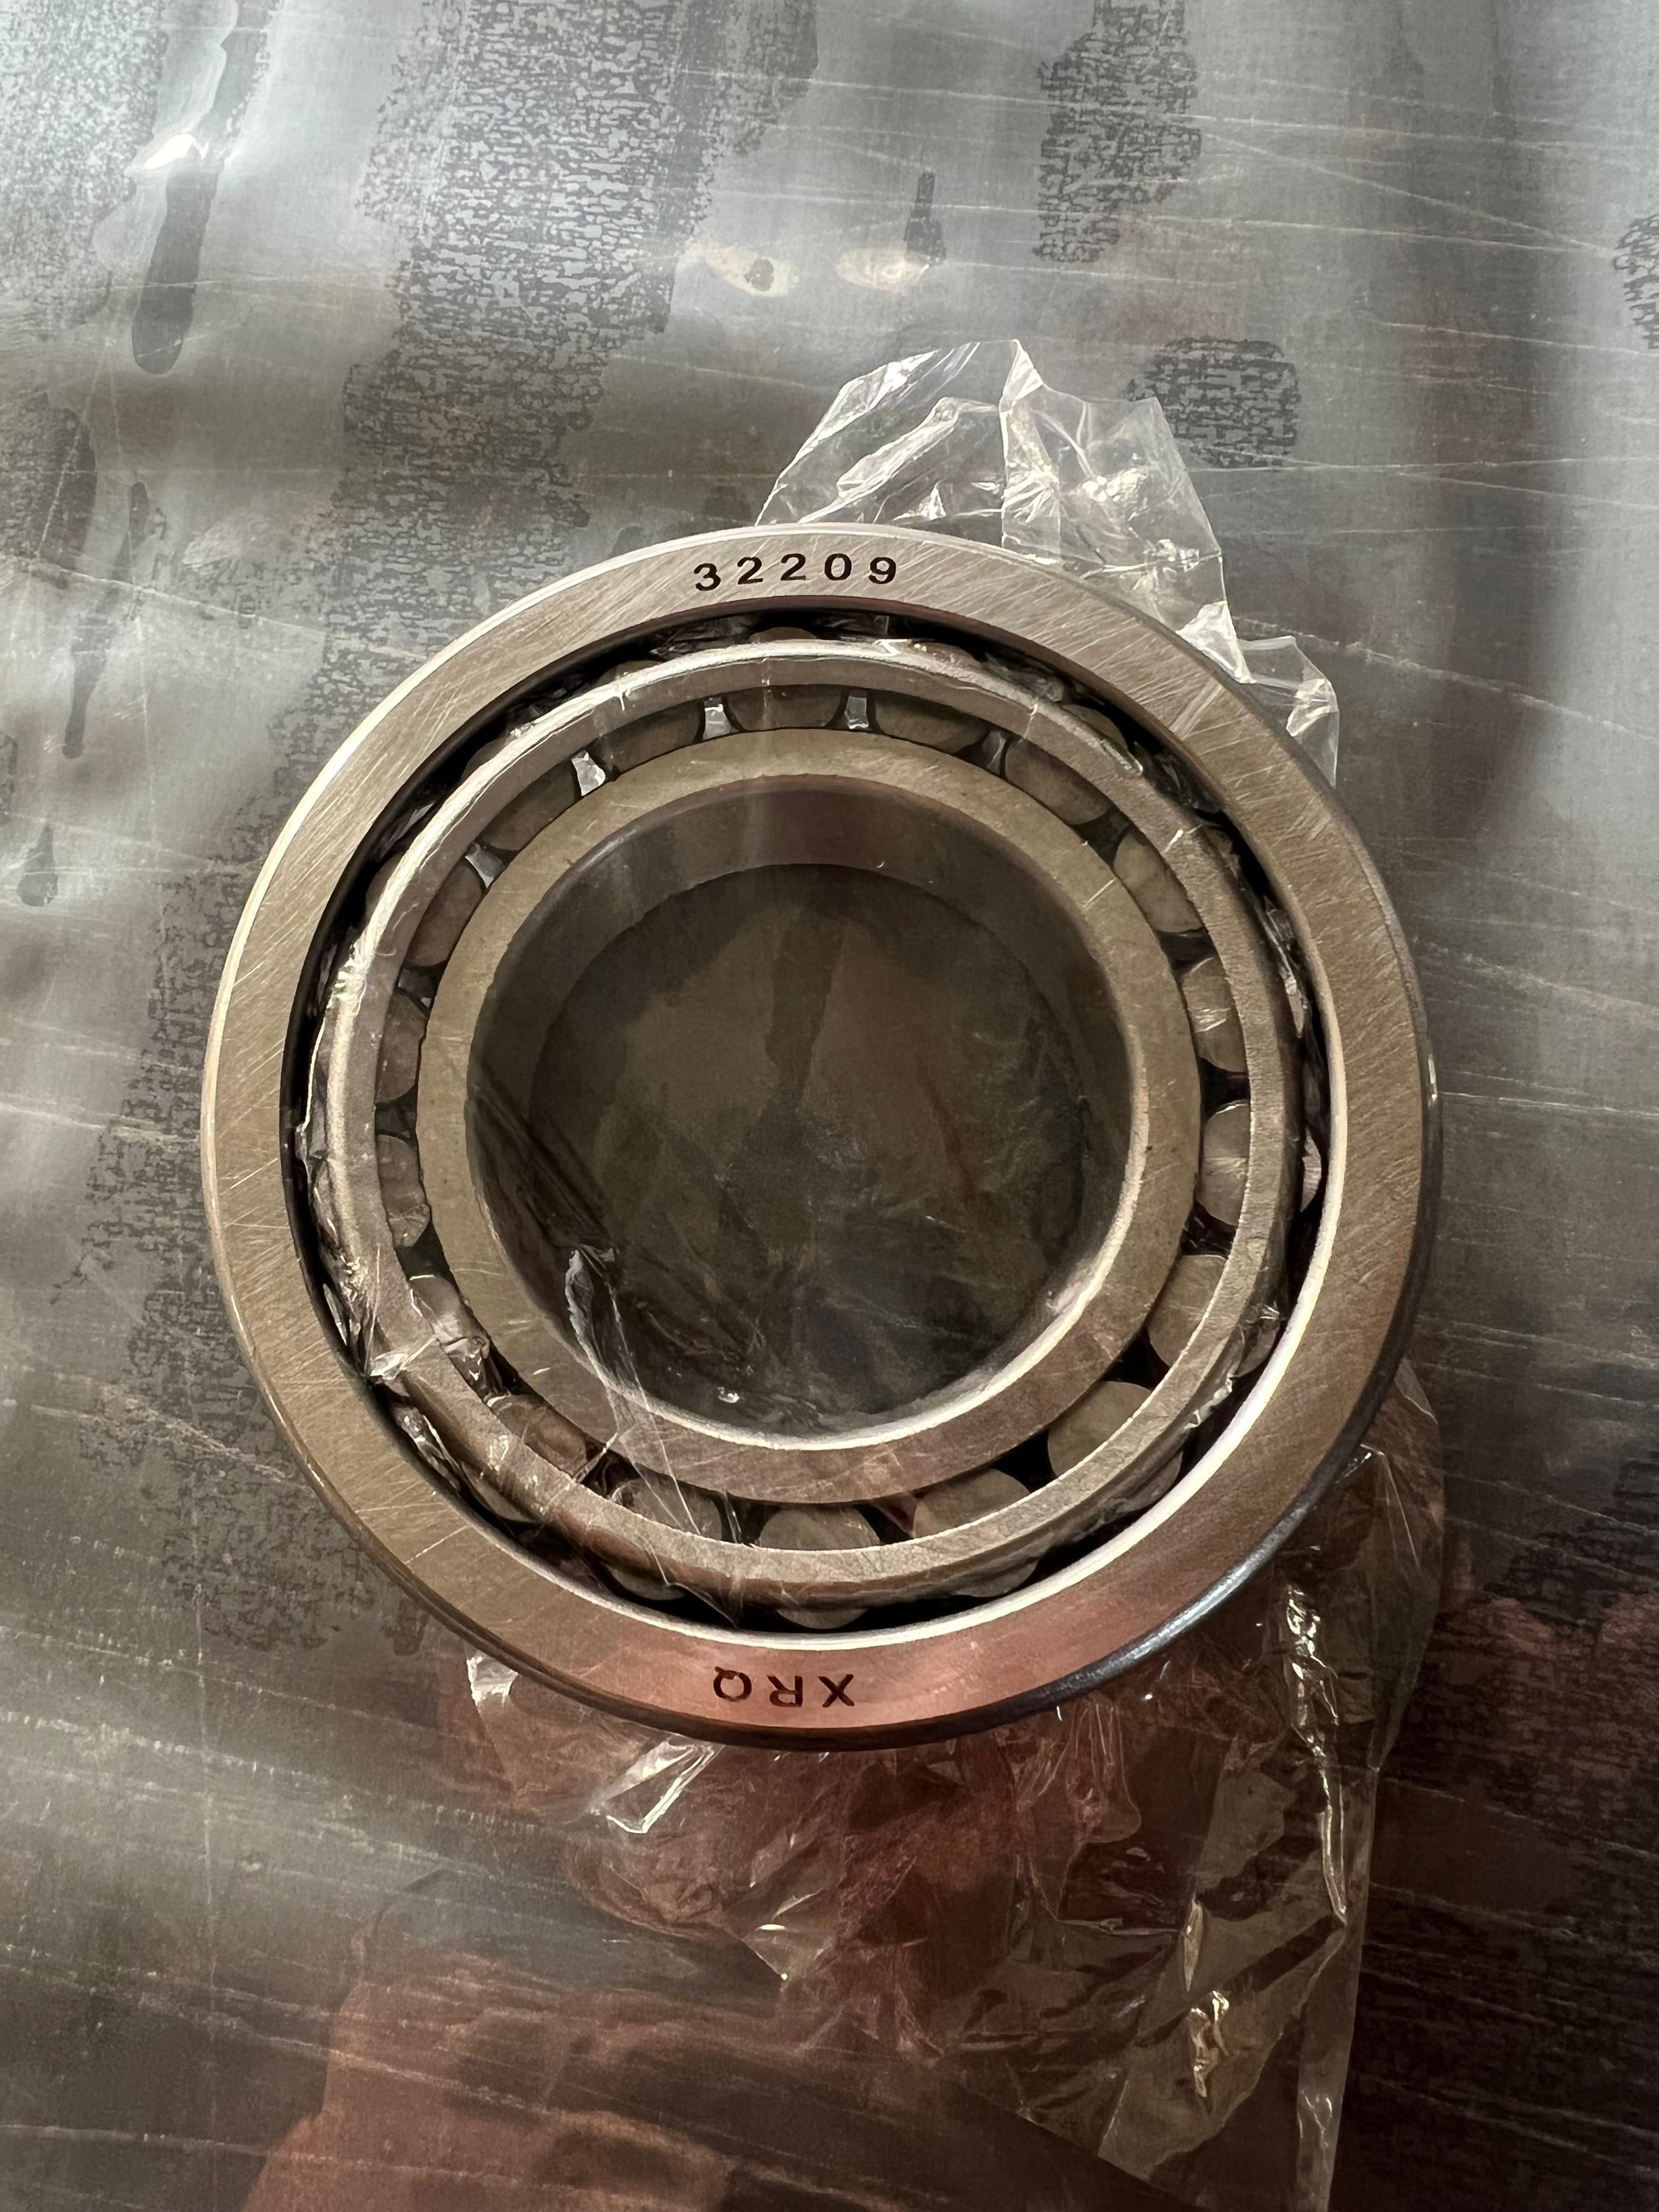 https://www.xrlbearing.com/tapered-roller-bearing-3201232013320143201532016320173201832019-product/